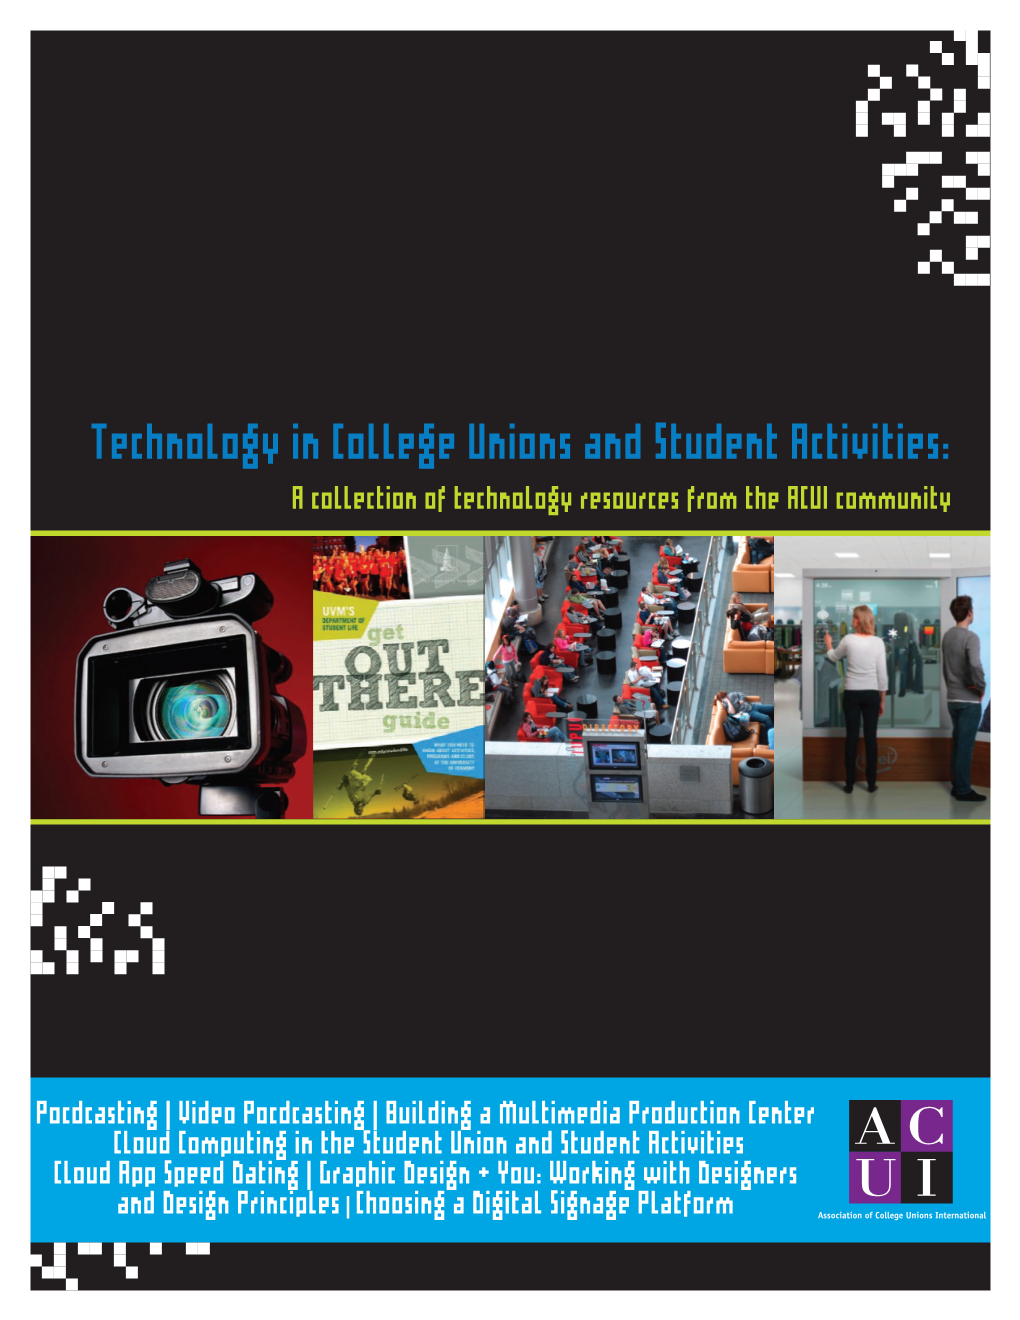 Technology in College Unions and Student Activities: a Collection of Technology Resources from the ACUI Community